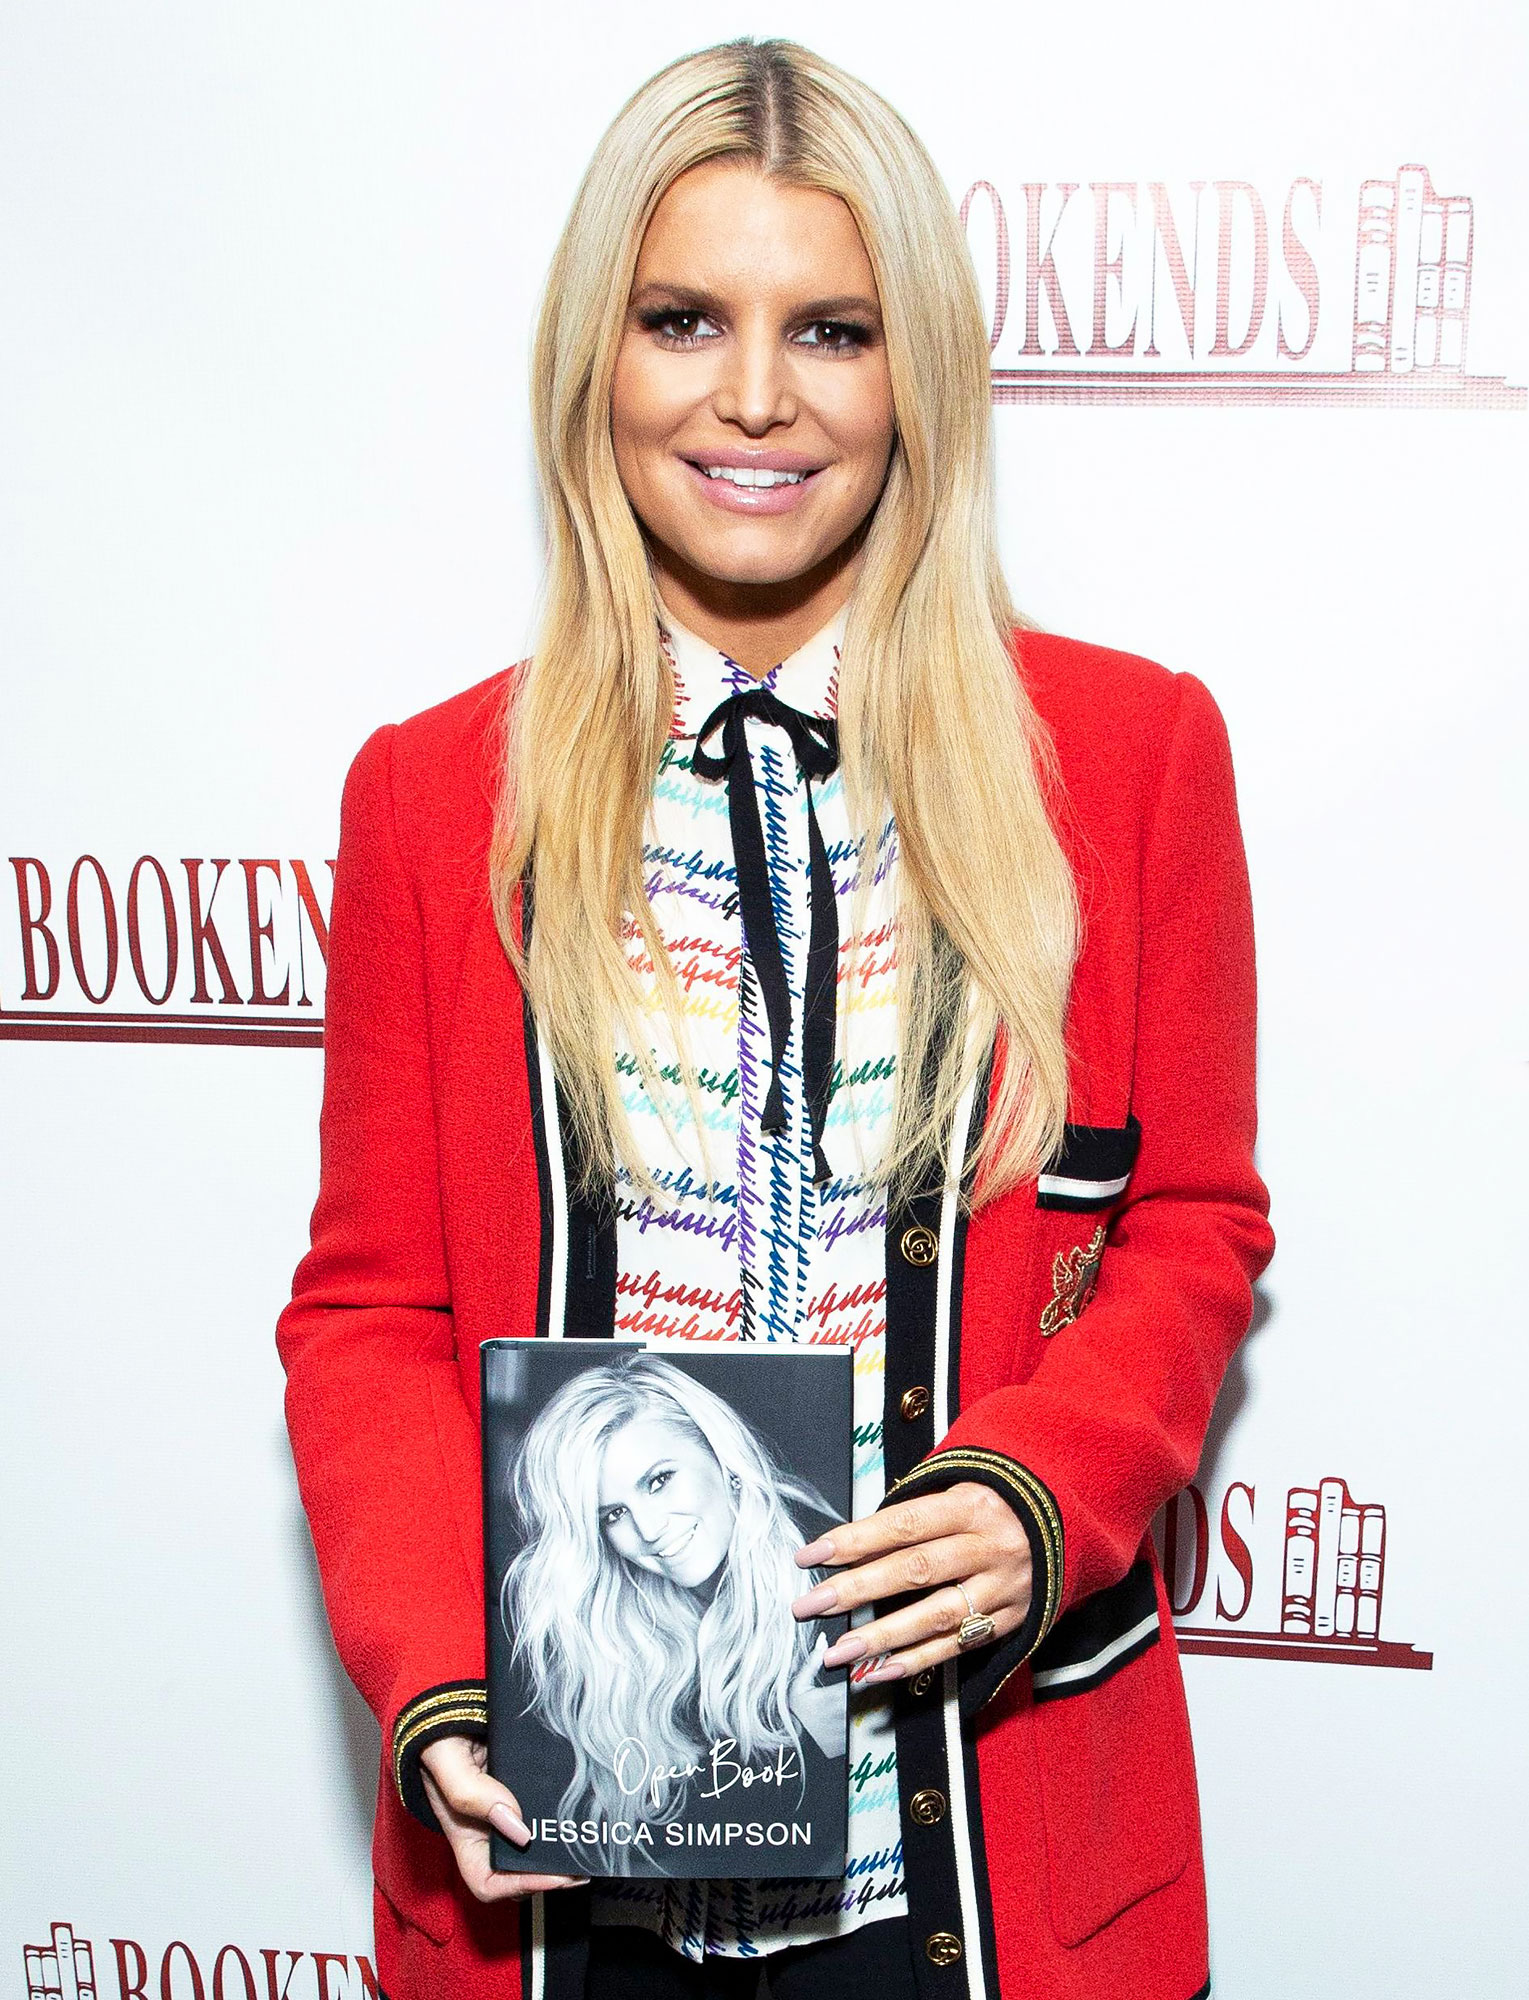 Jessica Simpson Shares Diary Entries About Nick Lachey Divorce, ‘Mom Jeans’ Body-Shaming and More in ‘Open Book’